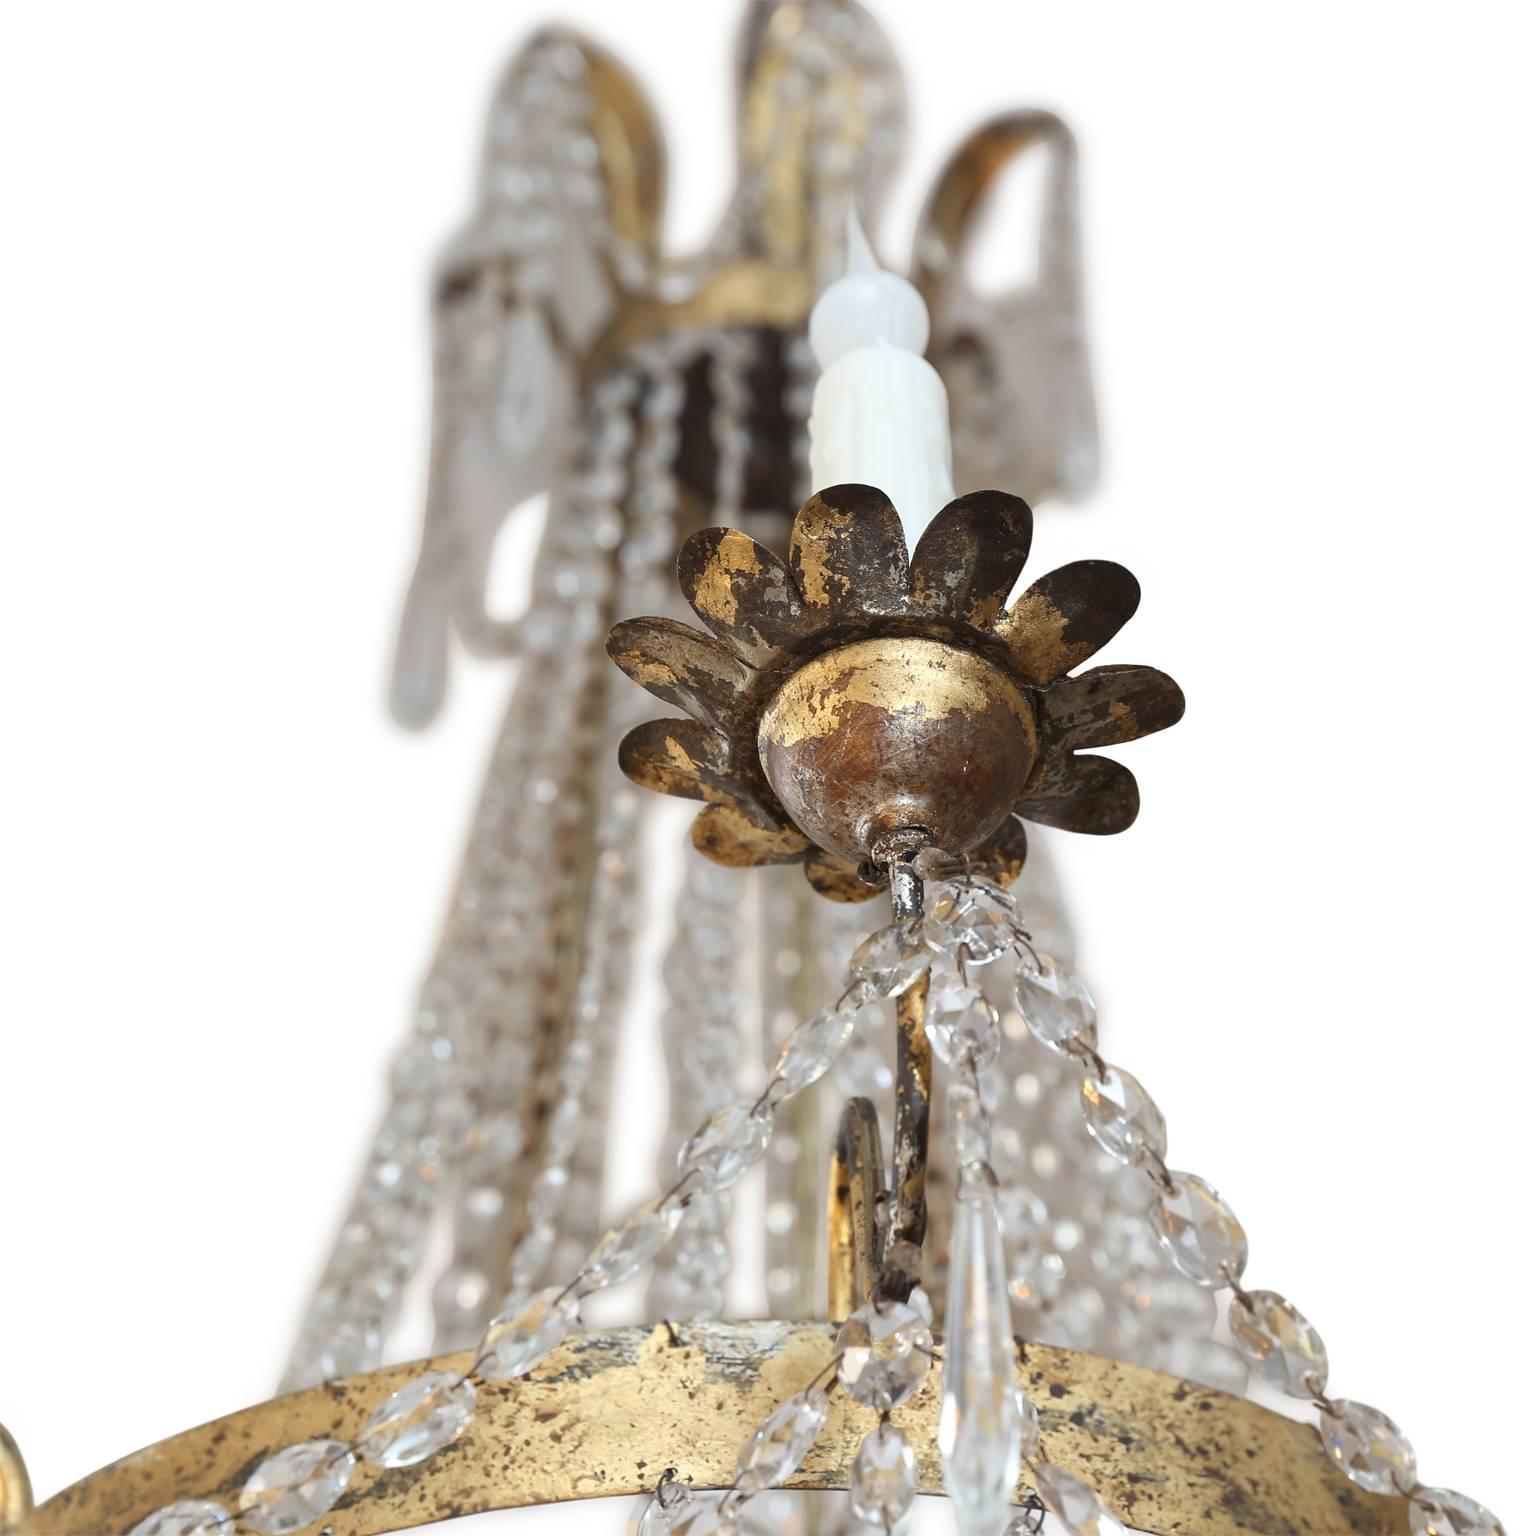 An elegant chandelier in the Neoclassical style from Milan dating to the late 19th century comprised of three metal tiers gilded in silver and gold connected by crystal chains and garlands. The upper crown-like tier is decorated with tole leaves and